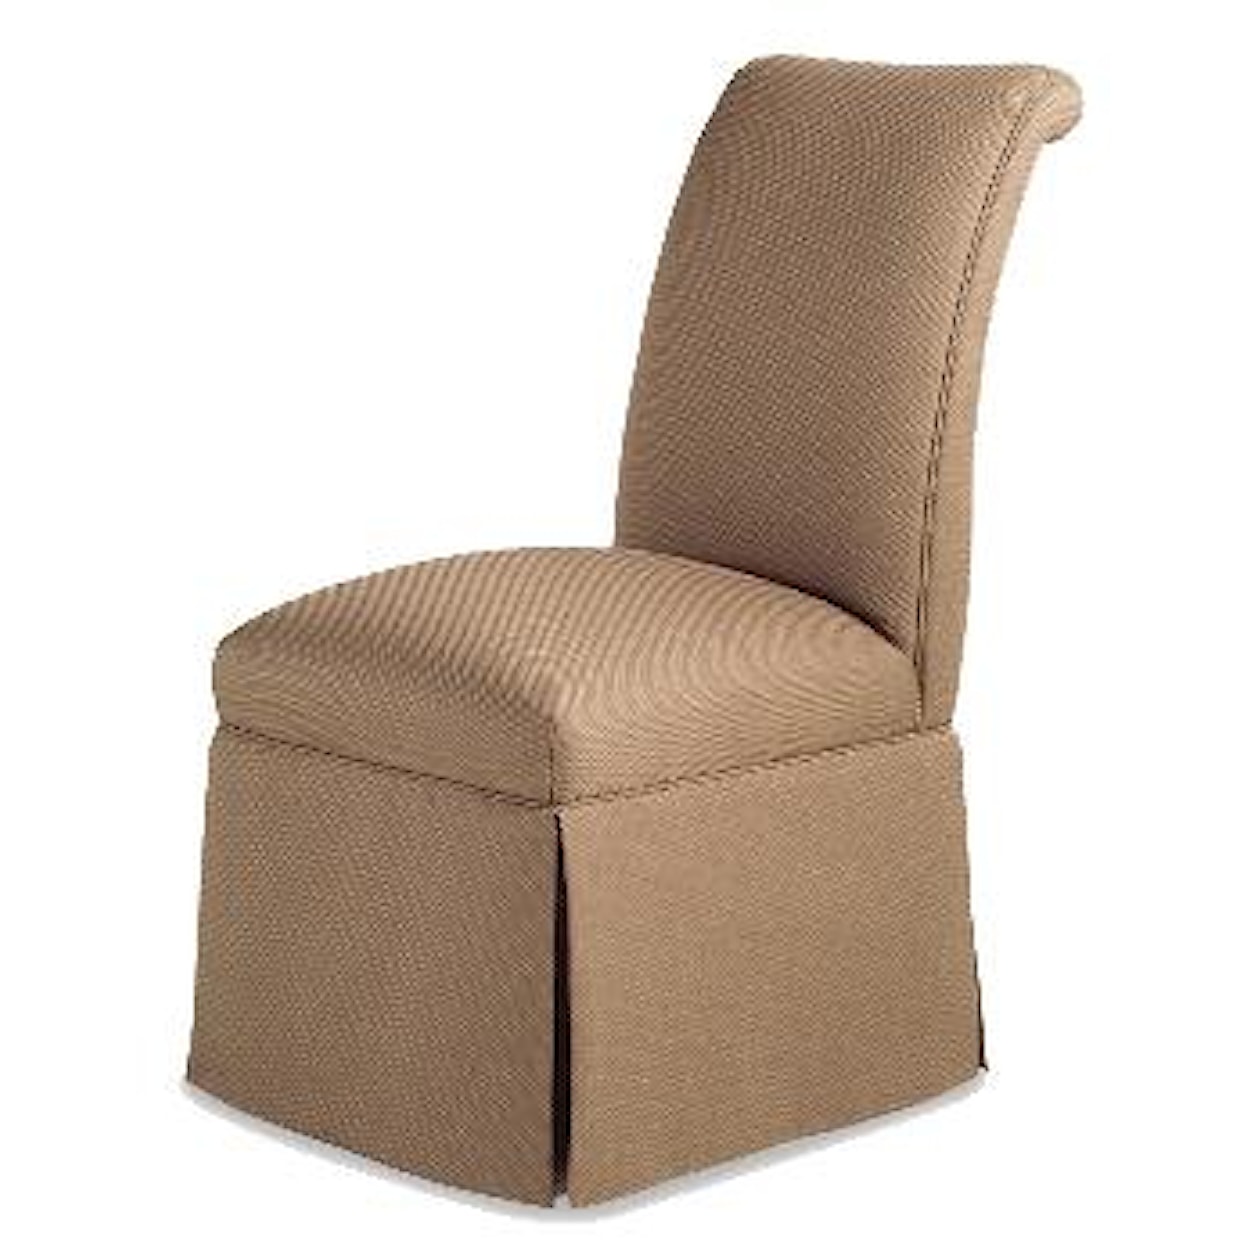 Jessica Charles Fine Upholstered Accents Sebastian Skirted Armless Chair   